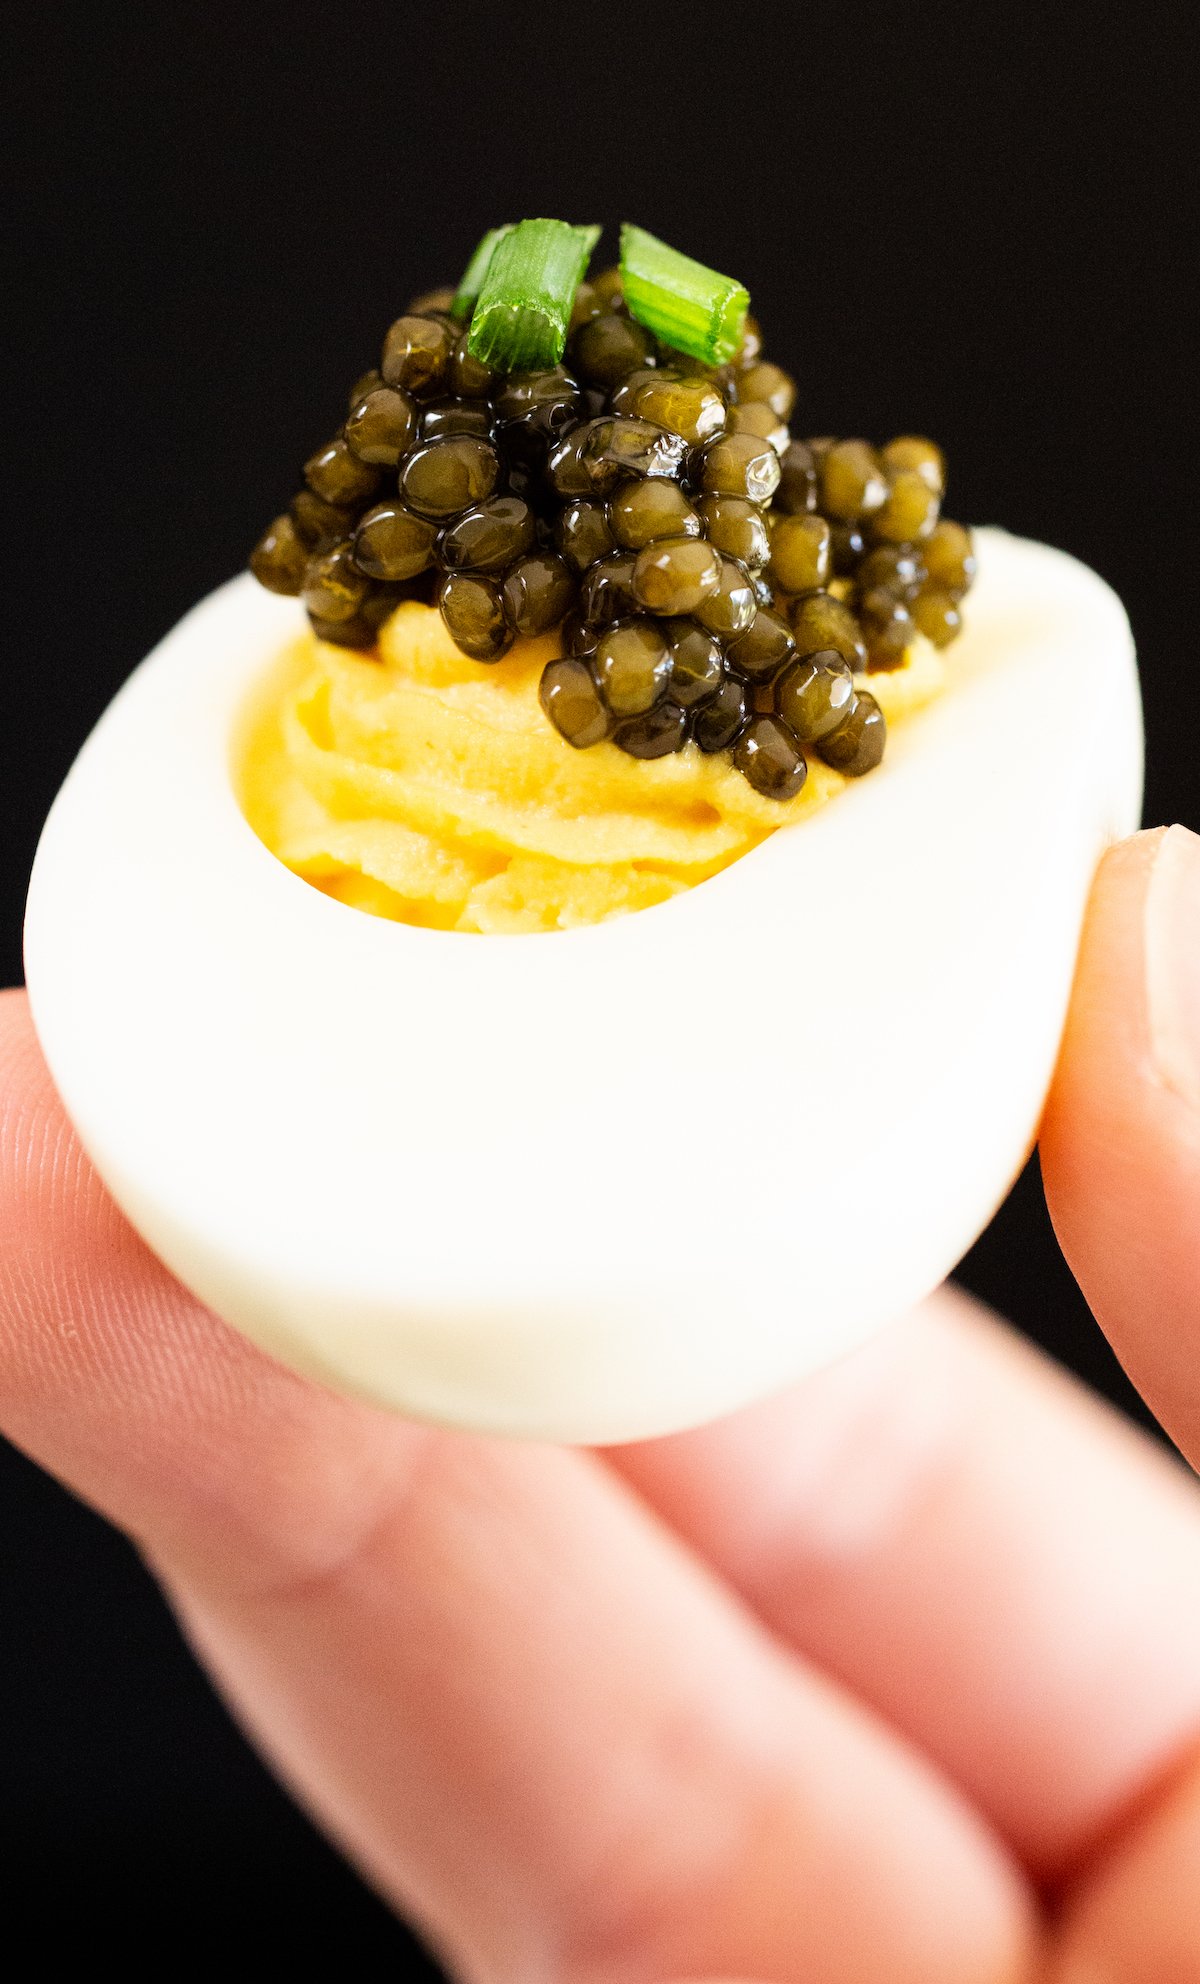 A hand holds up a deviled egg topped with caviar against a black background